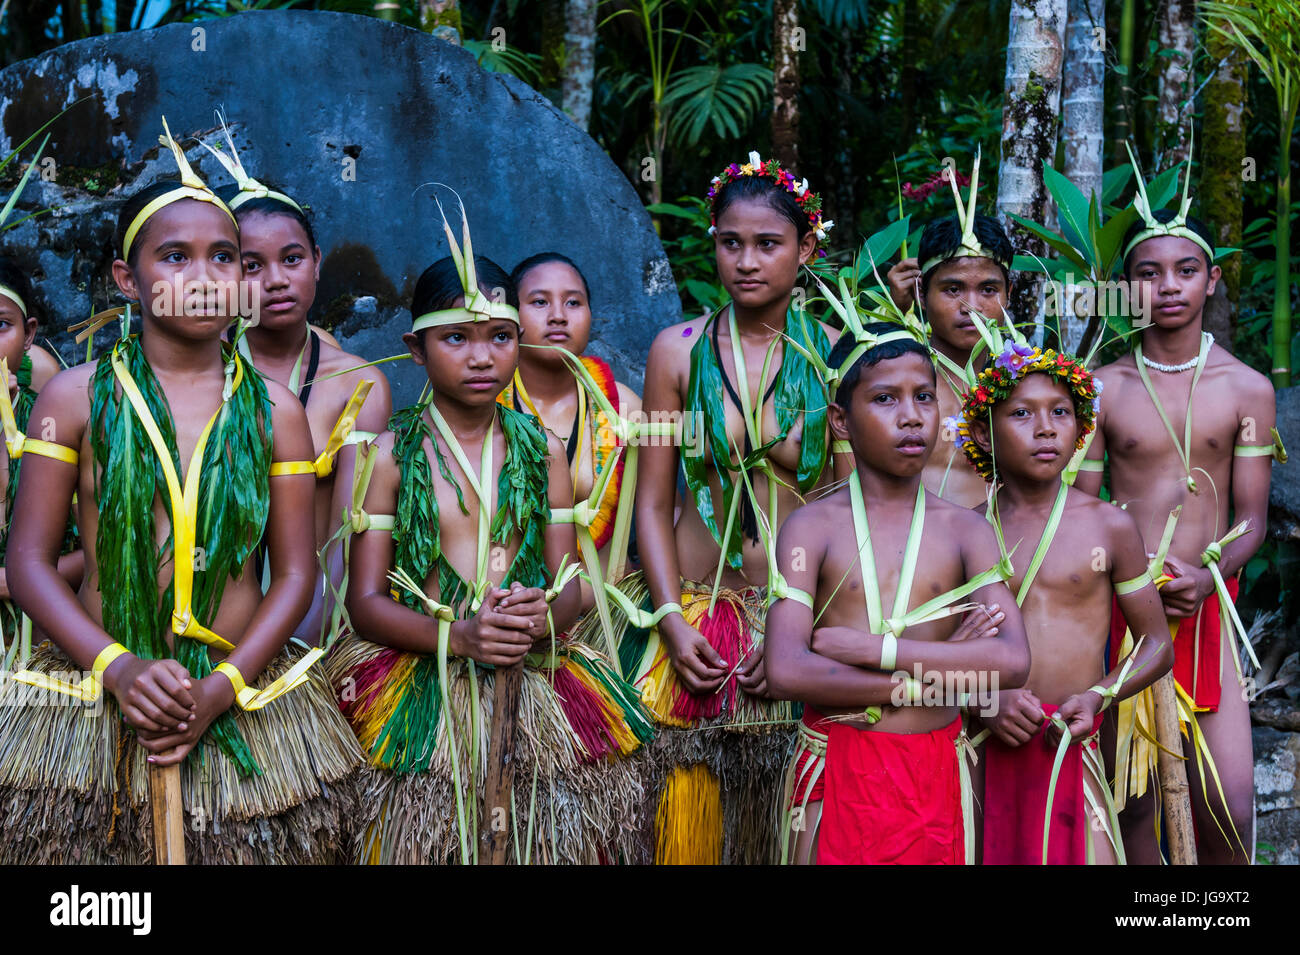 Traditional dressed islanders posing for the camera, Island of Yap, Micronesia Stock Photo